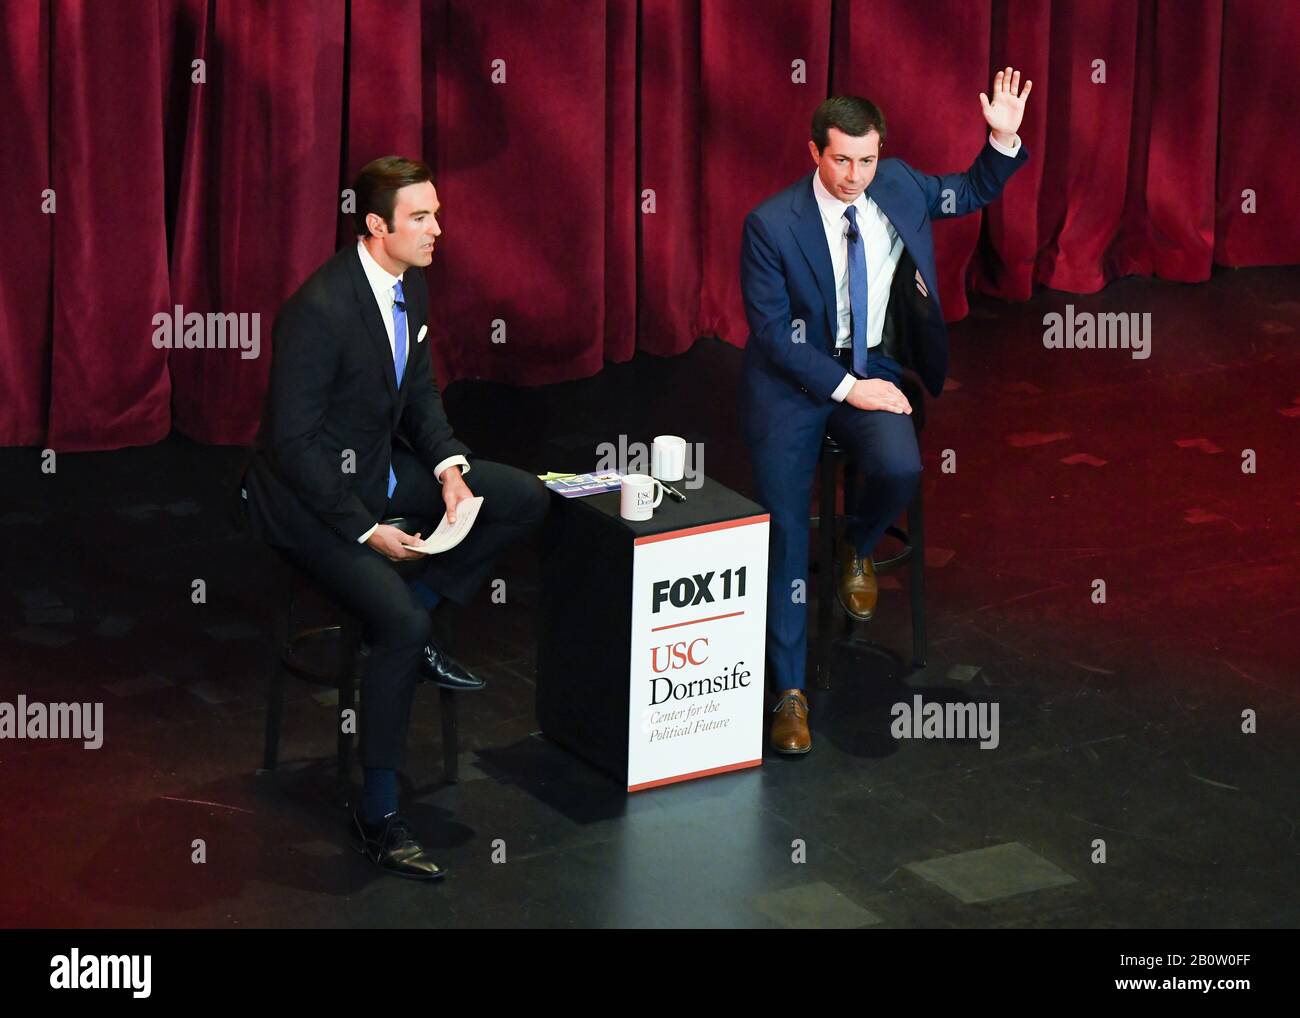 Democratic presidential candidate Pete Buttigieg (r) attends Fox11 Town Hall hosted by Elex Michaelson (l) to speak at a USC Political Assembly at Bovard Auditorium at USC on February 21, 2020 in Los Angeles, California.. Stock Photo